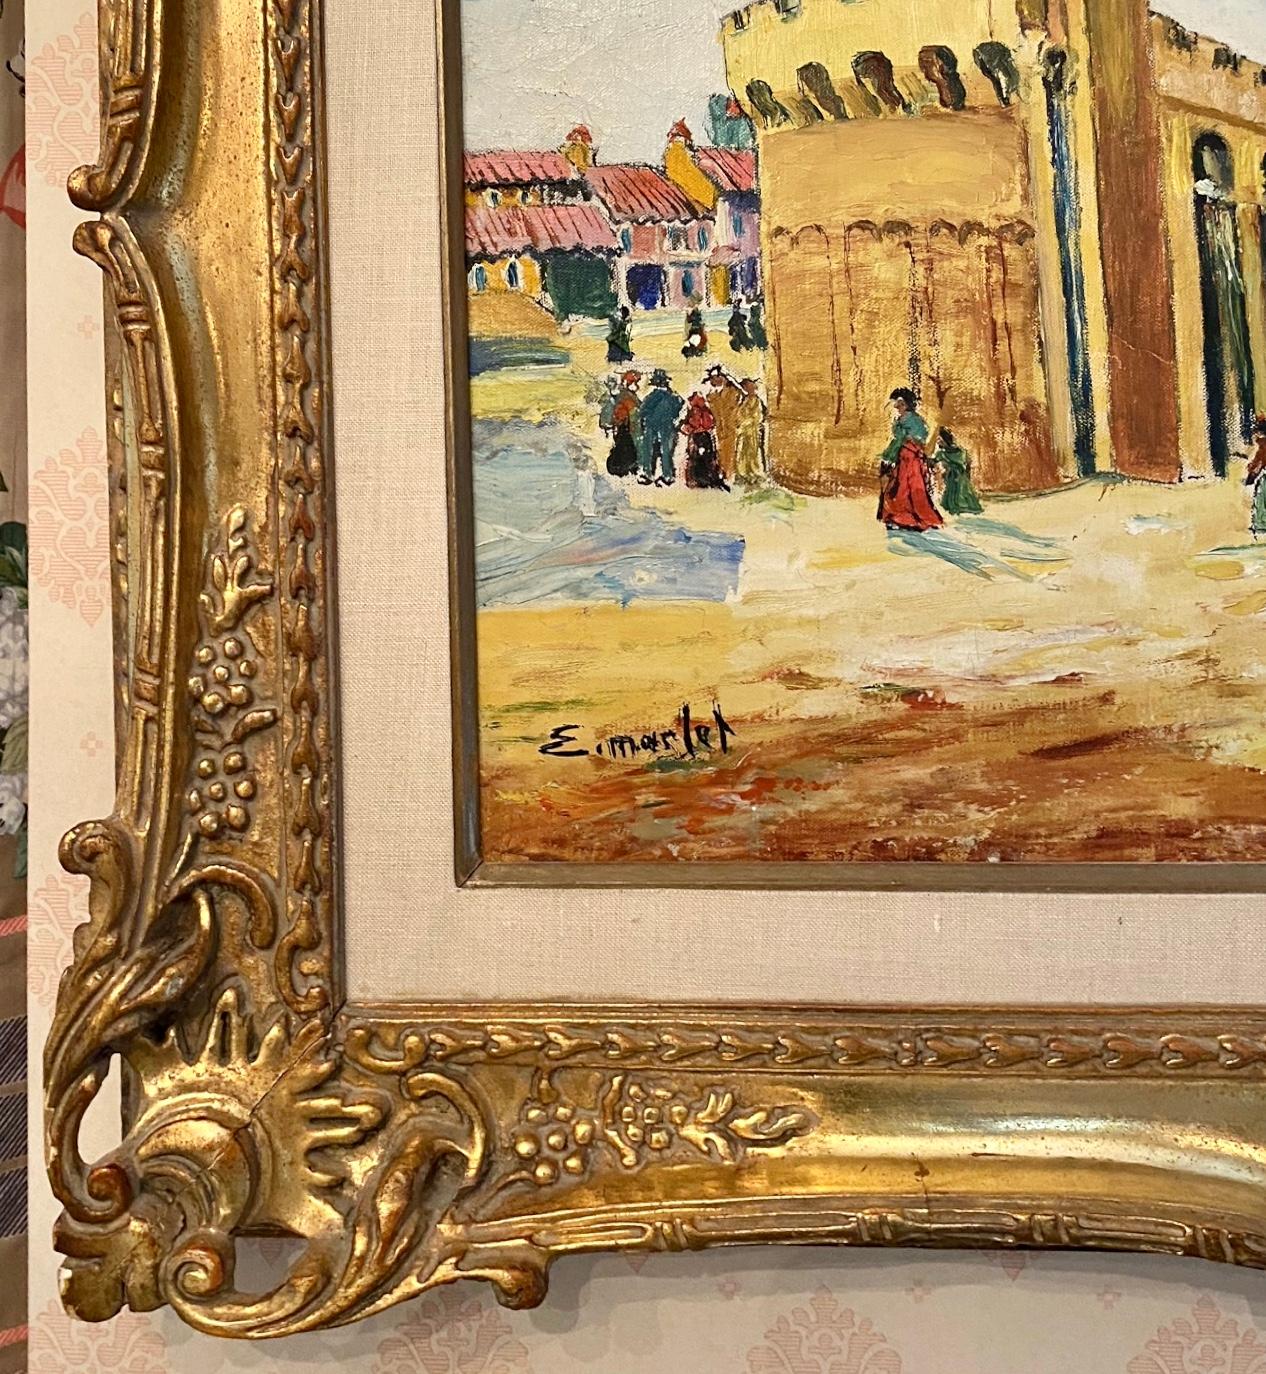 Oil on canvas signed lower left.
Elisee Maclet (1881-1962) Very well listed French artist. Studied in Paris, was influence by many famous French artists of the beginning of the 20th century. 
The work measures 17